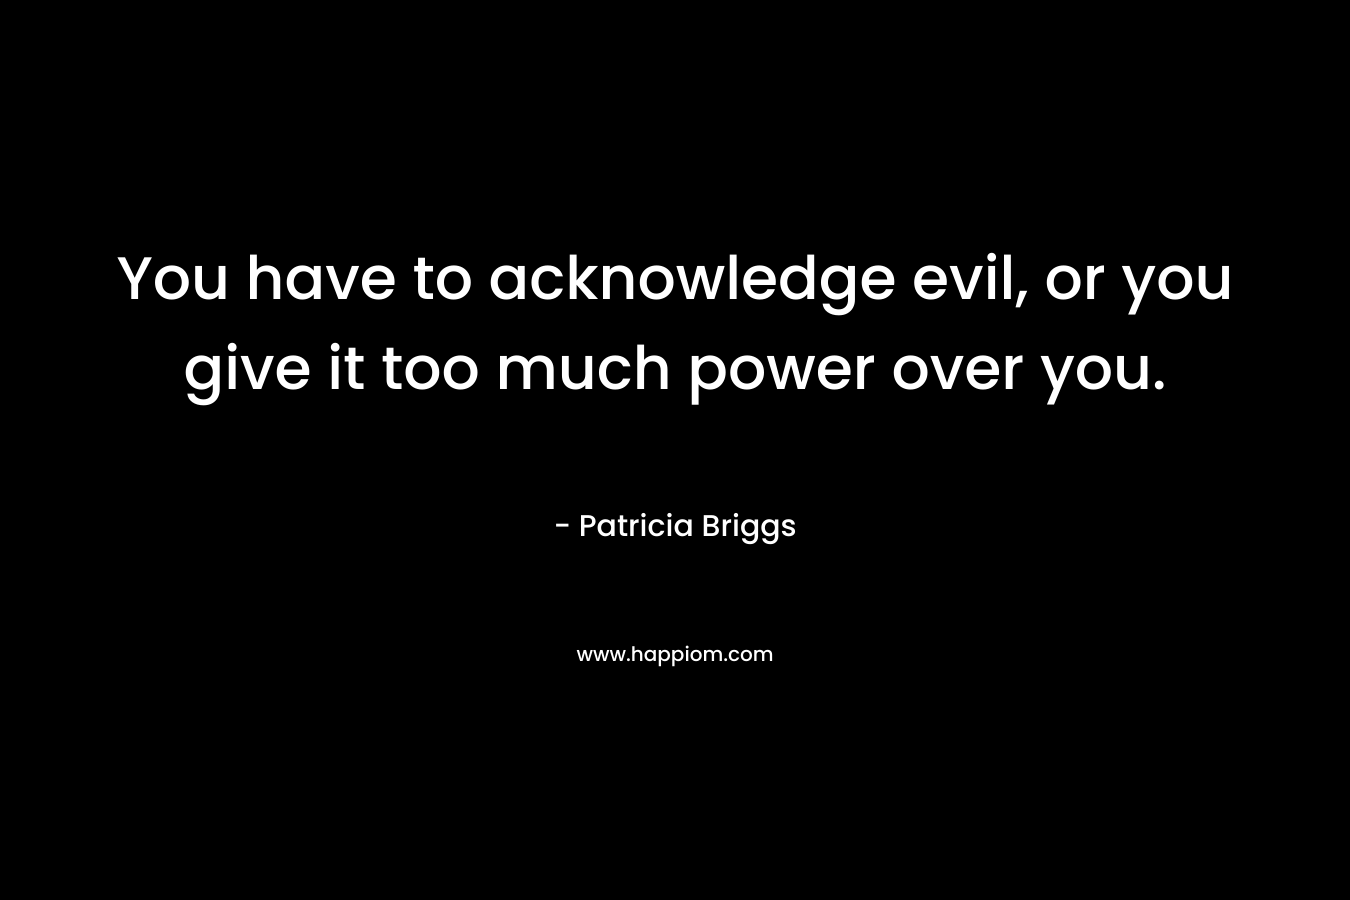 You have to acknowledge evil, or you give it too much power over you.